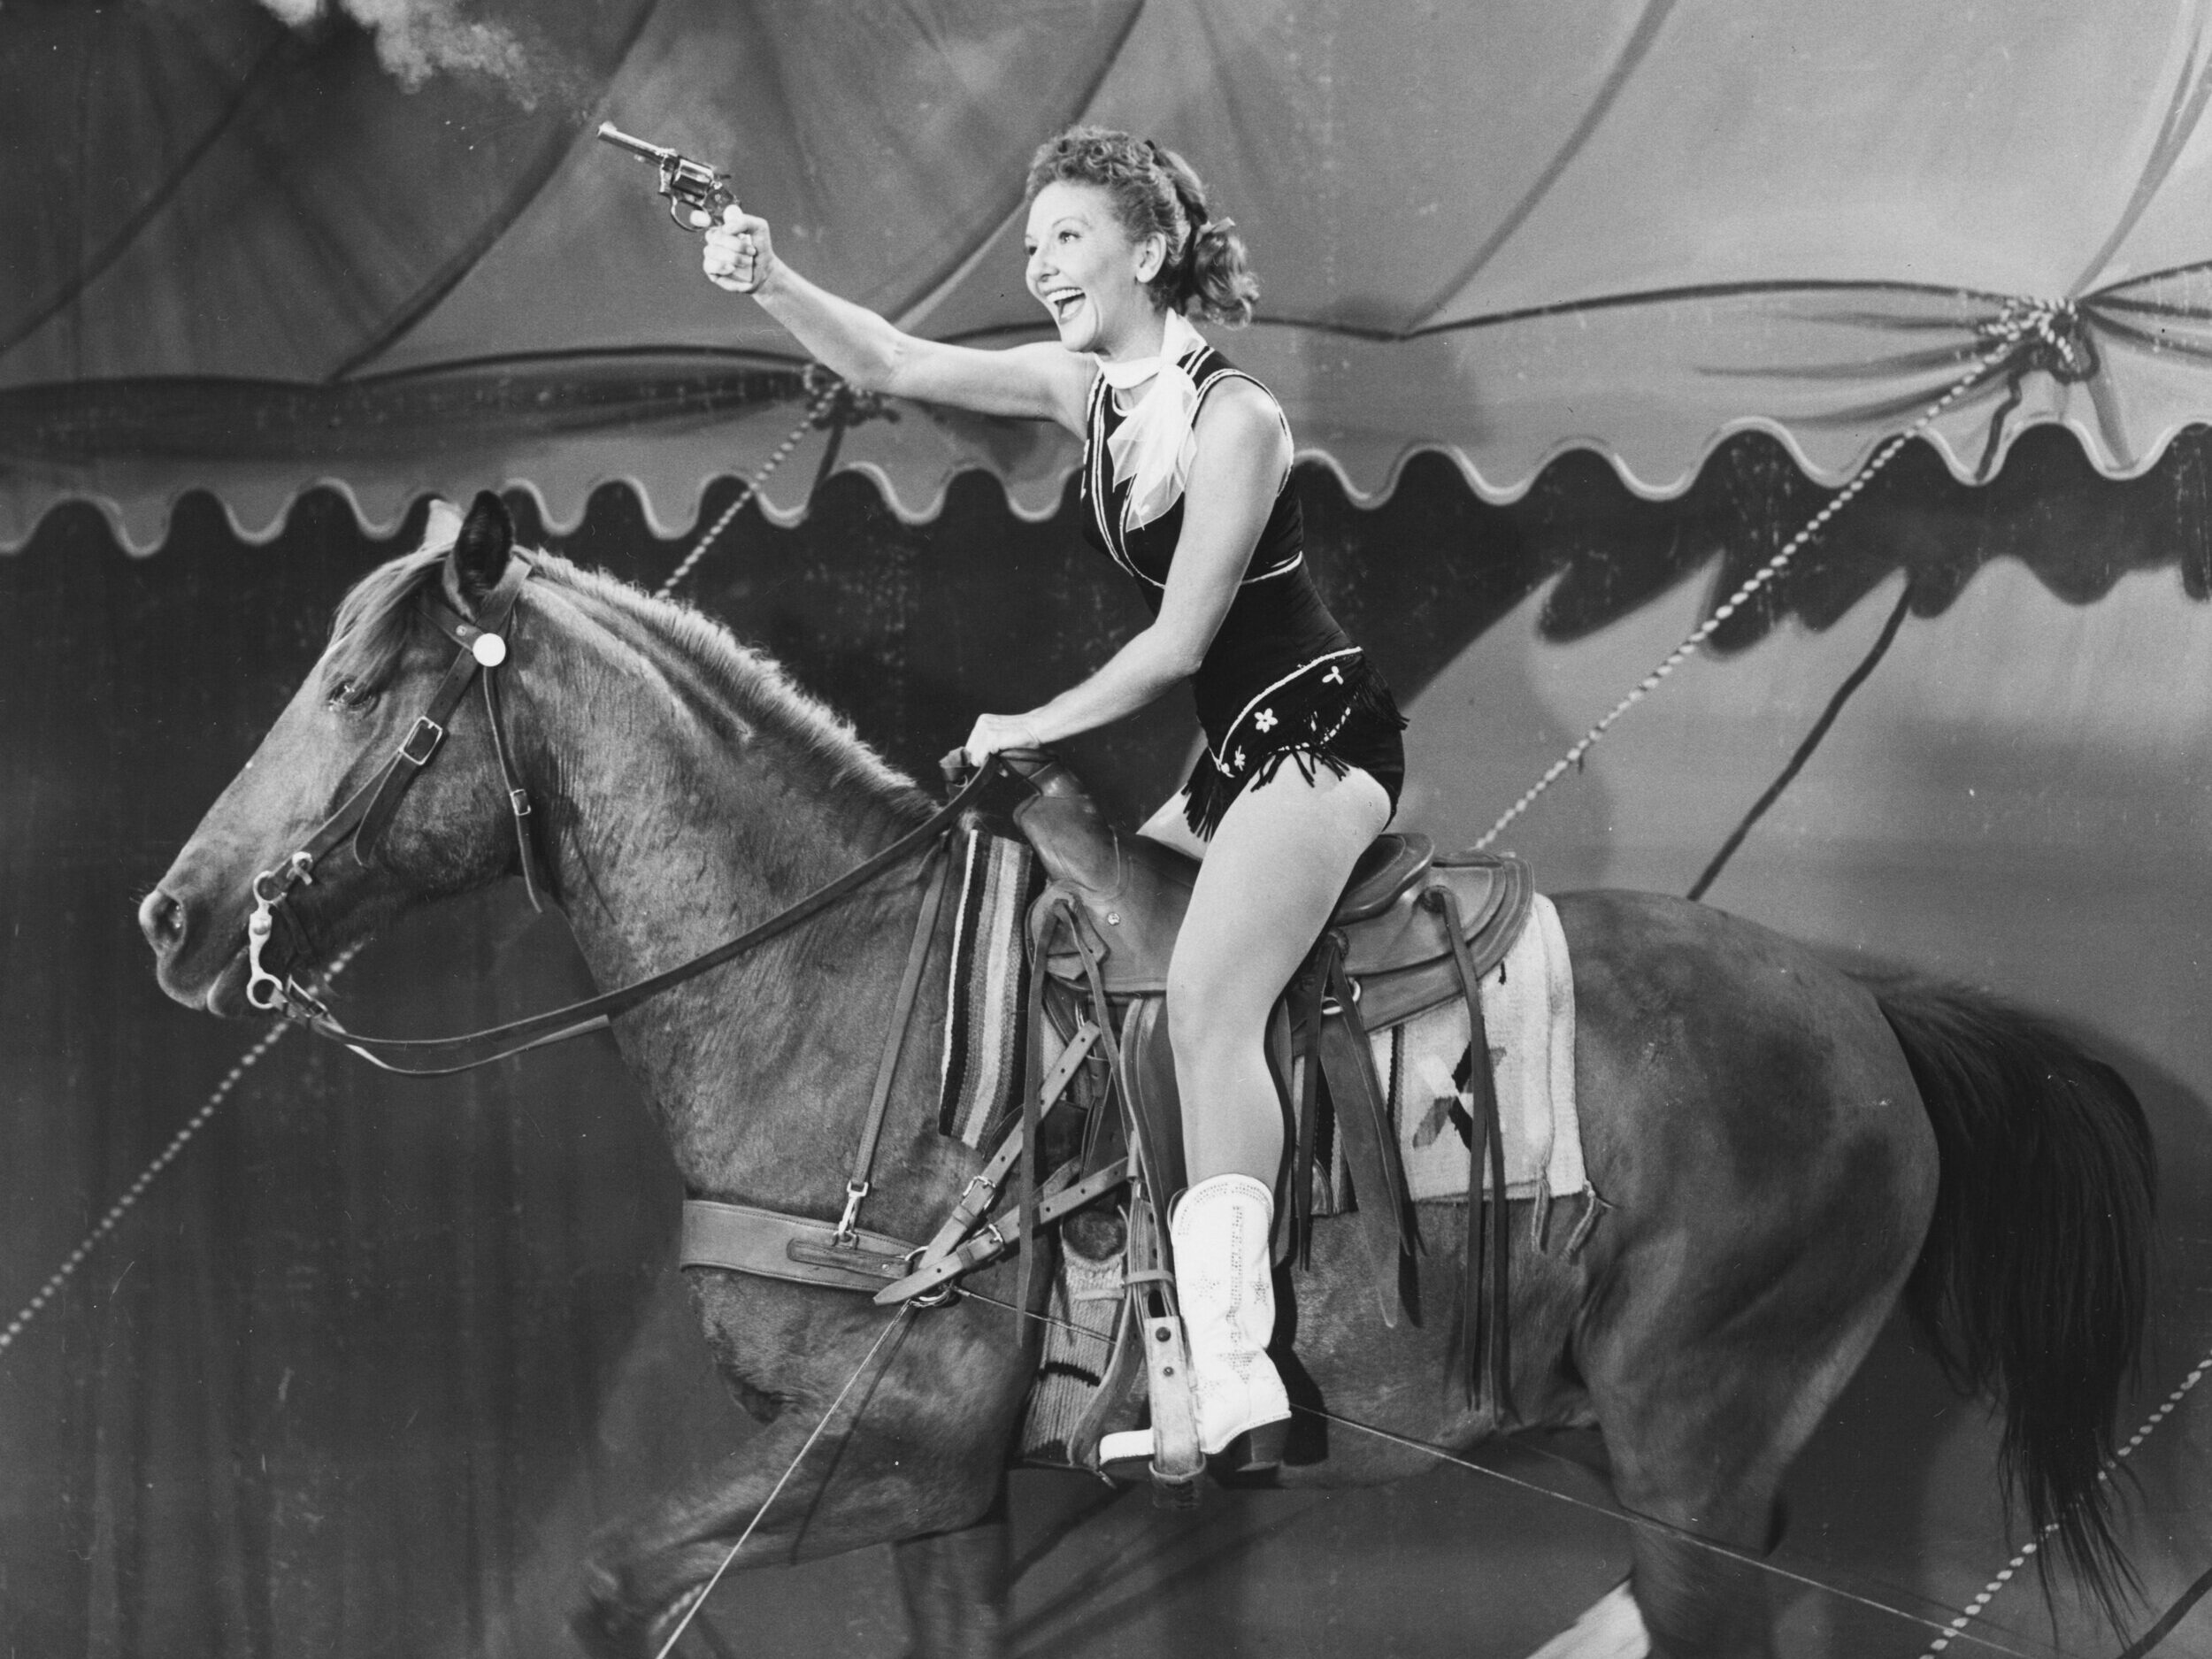 Mary Martin in the First U.S. Tour, 1947